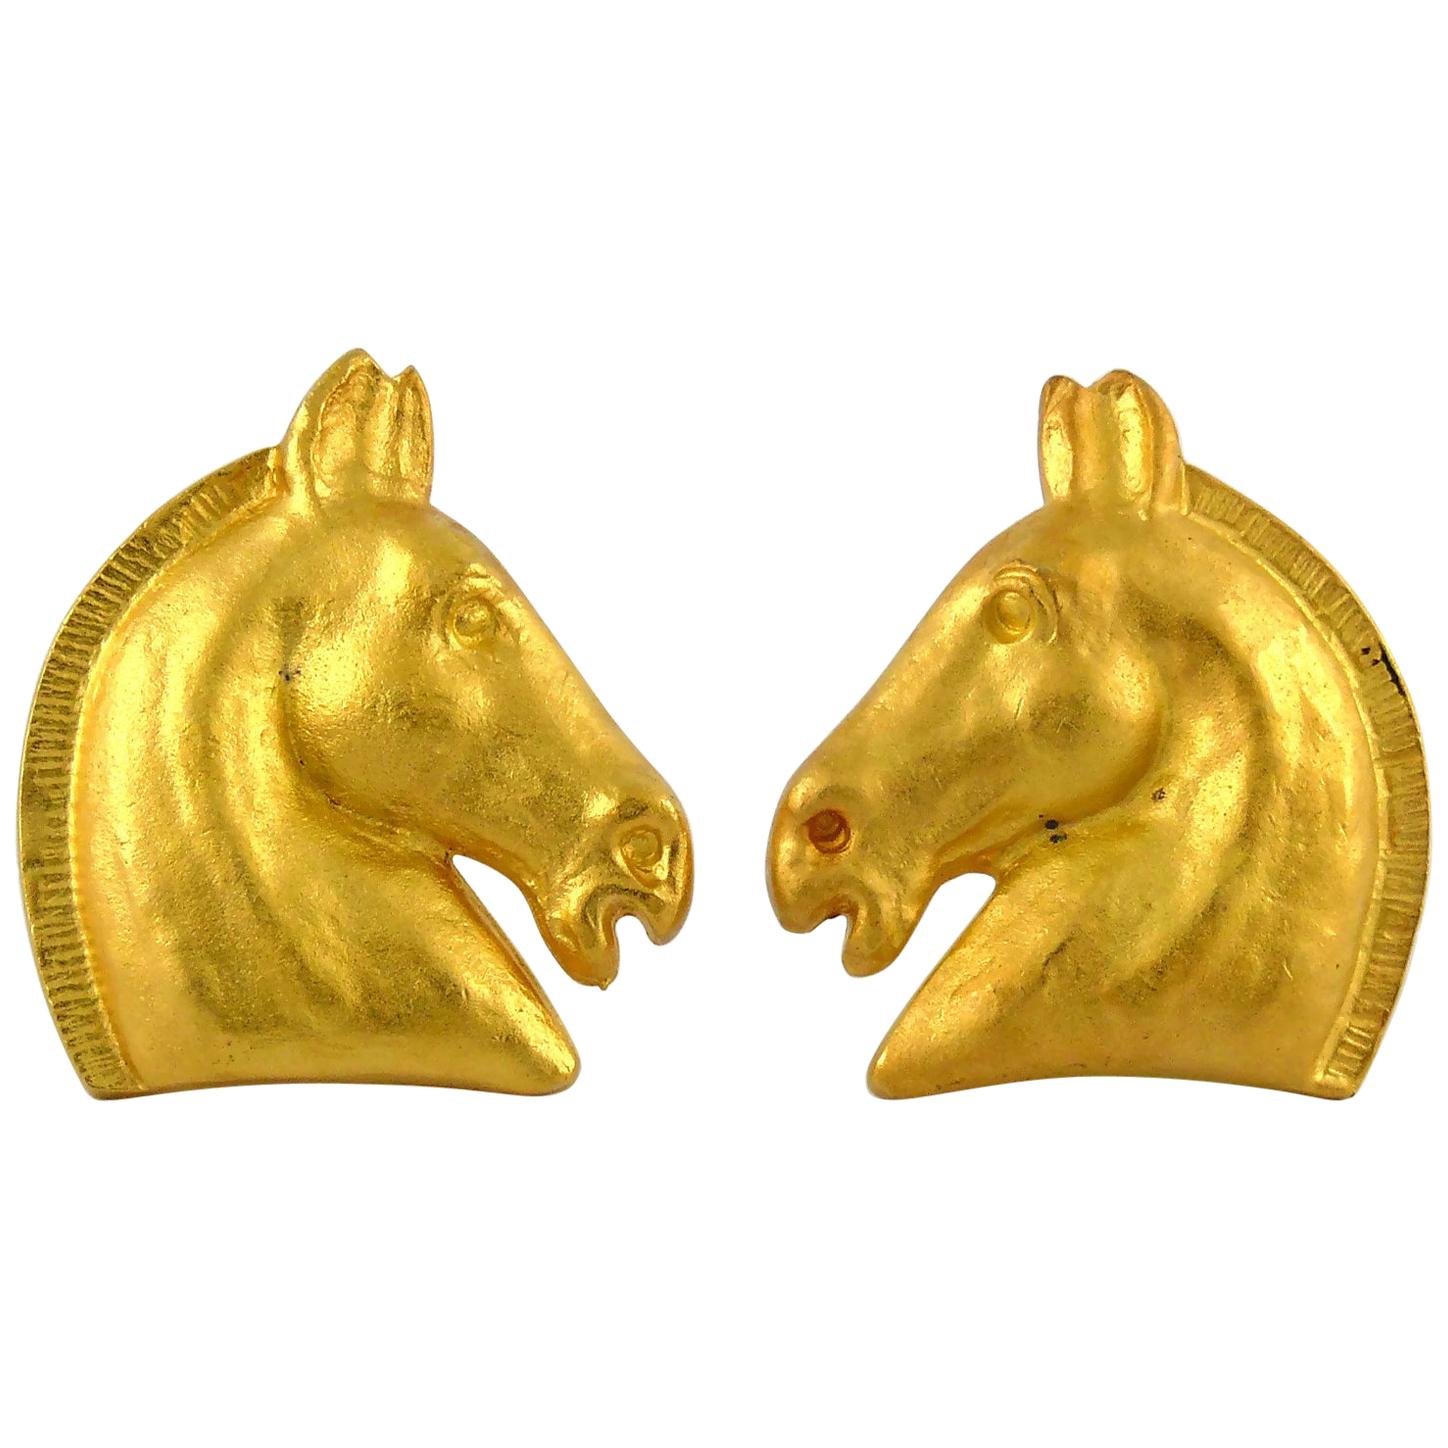 Hermes Vintage Gold Toned Equestrian Clip-On Earrings